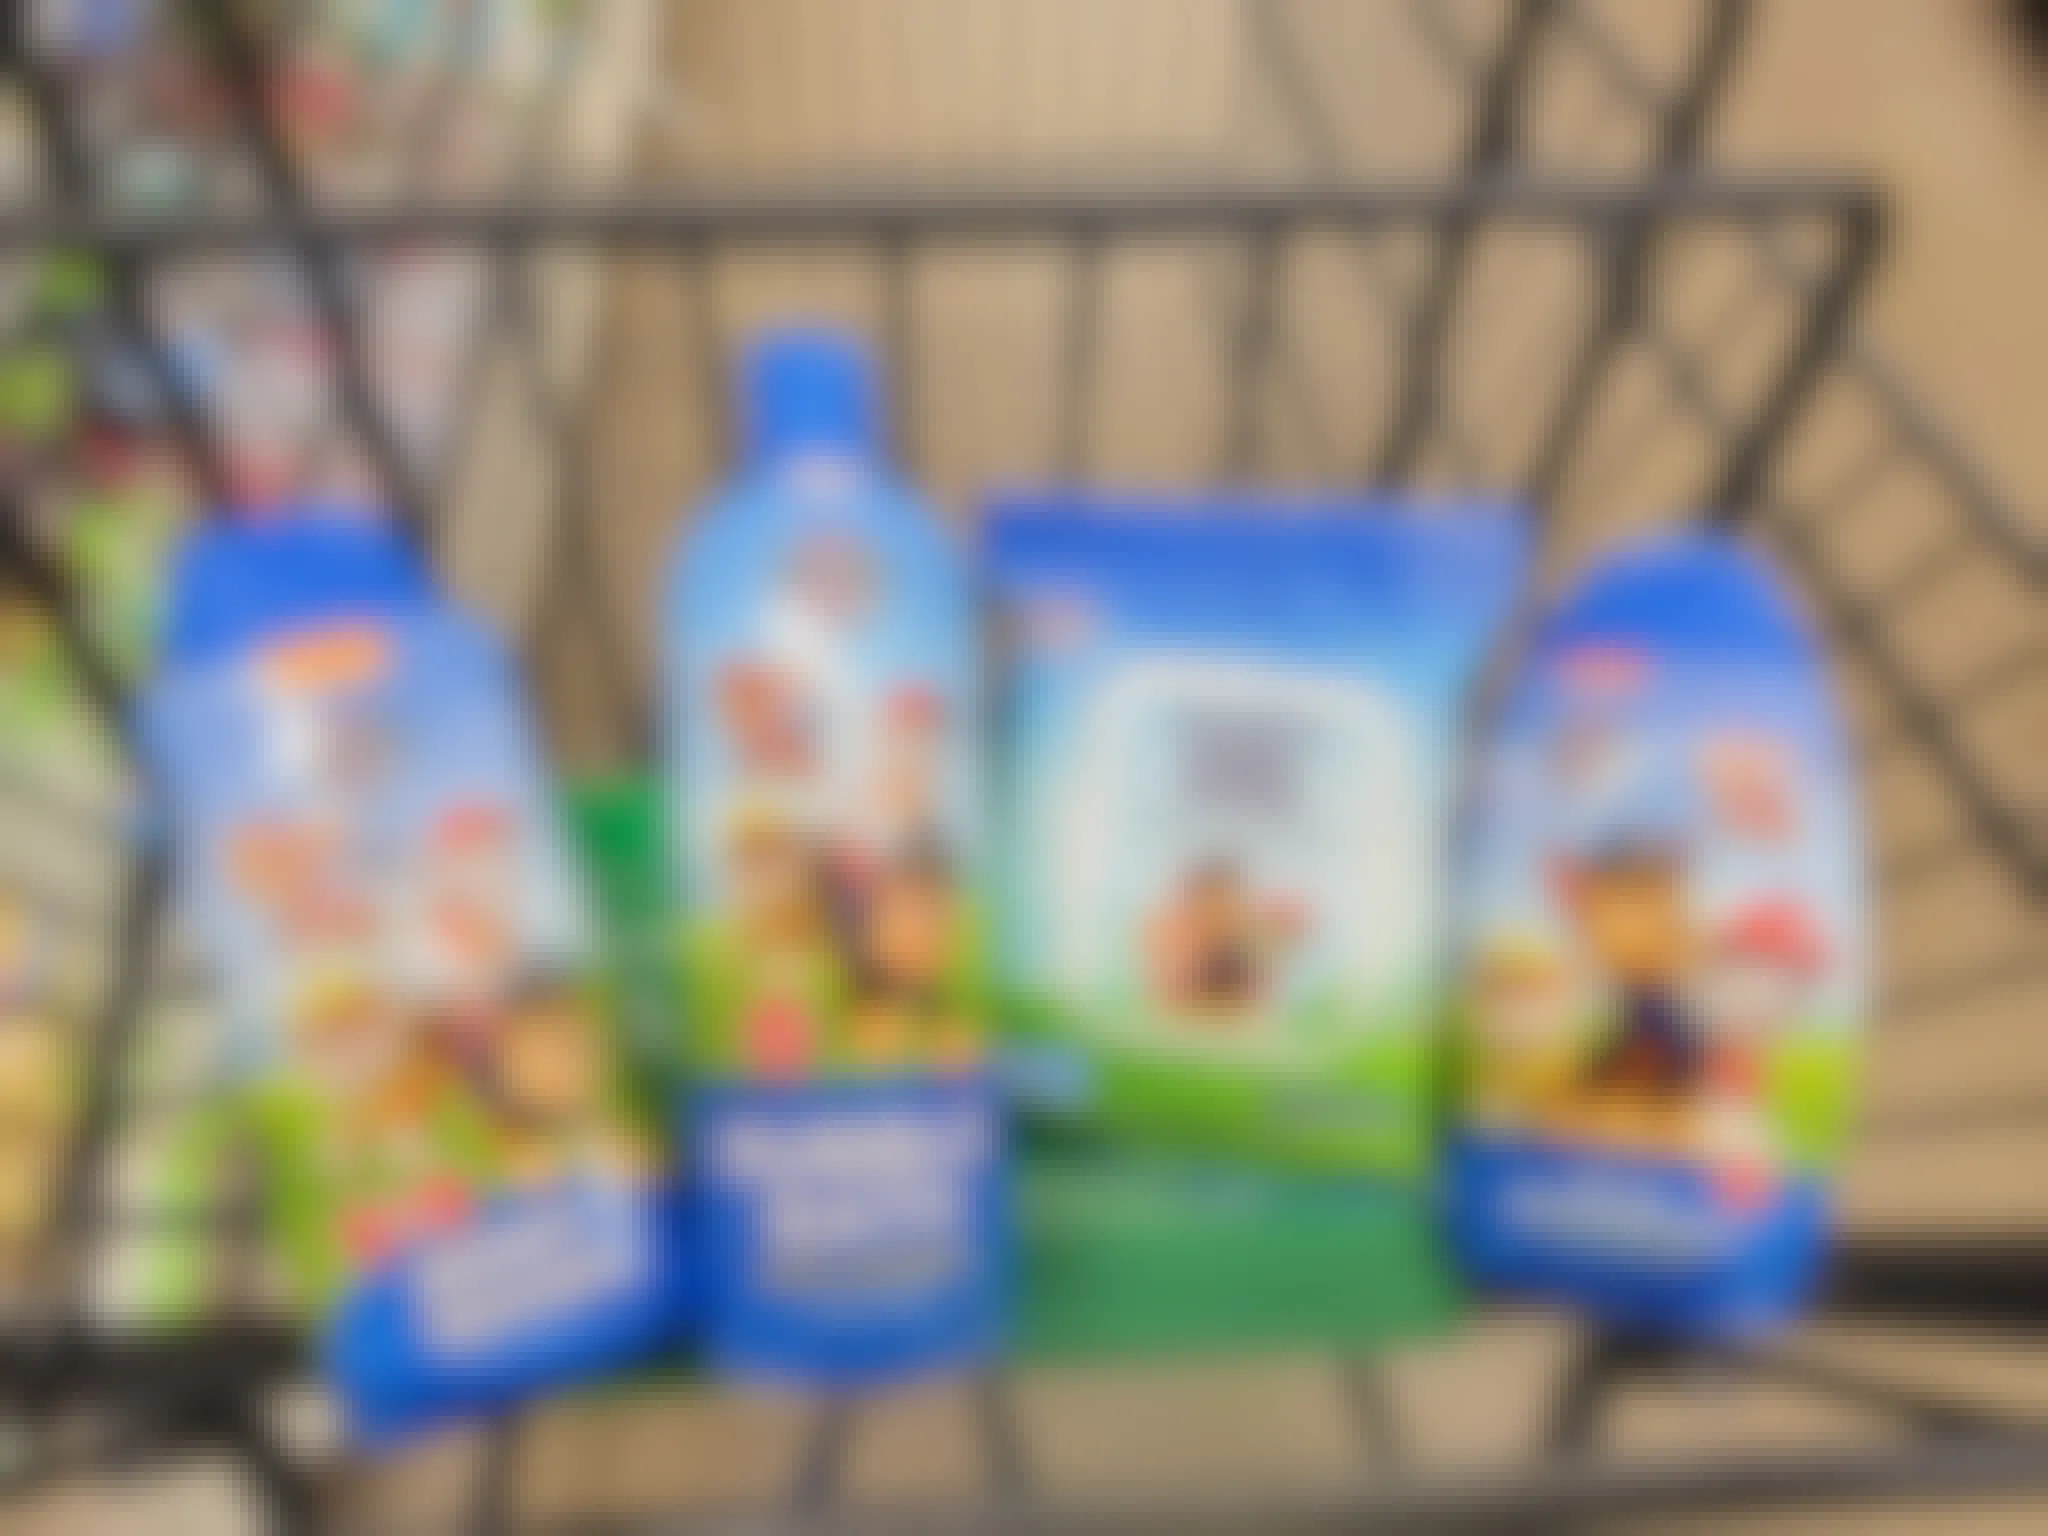 paw patrol body wash, bubble bath, nose wipes, and shampoo in a cart